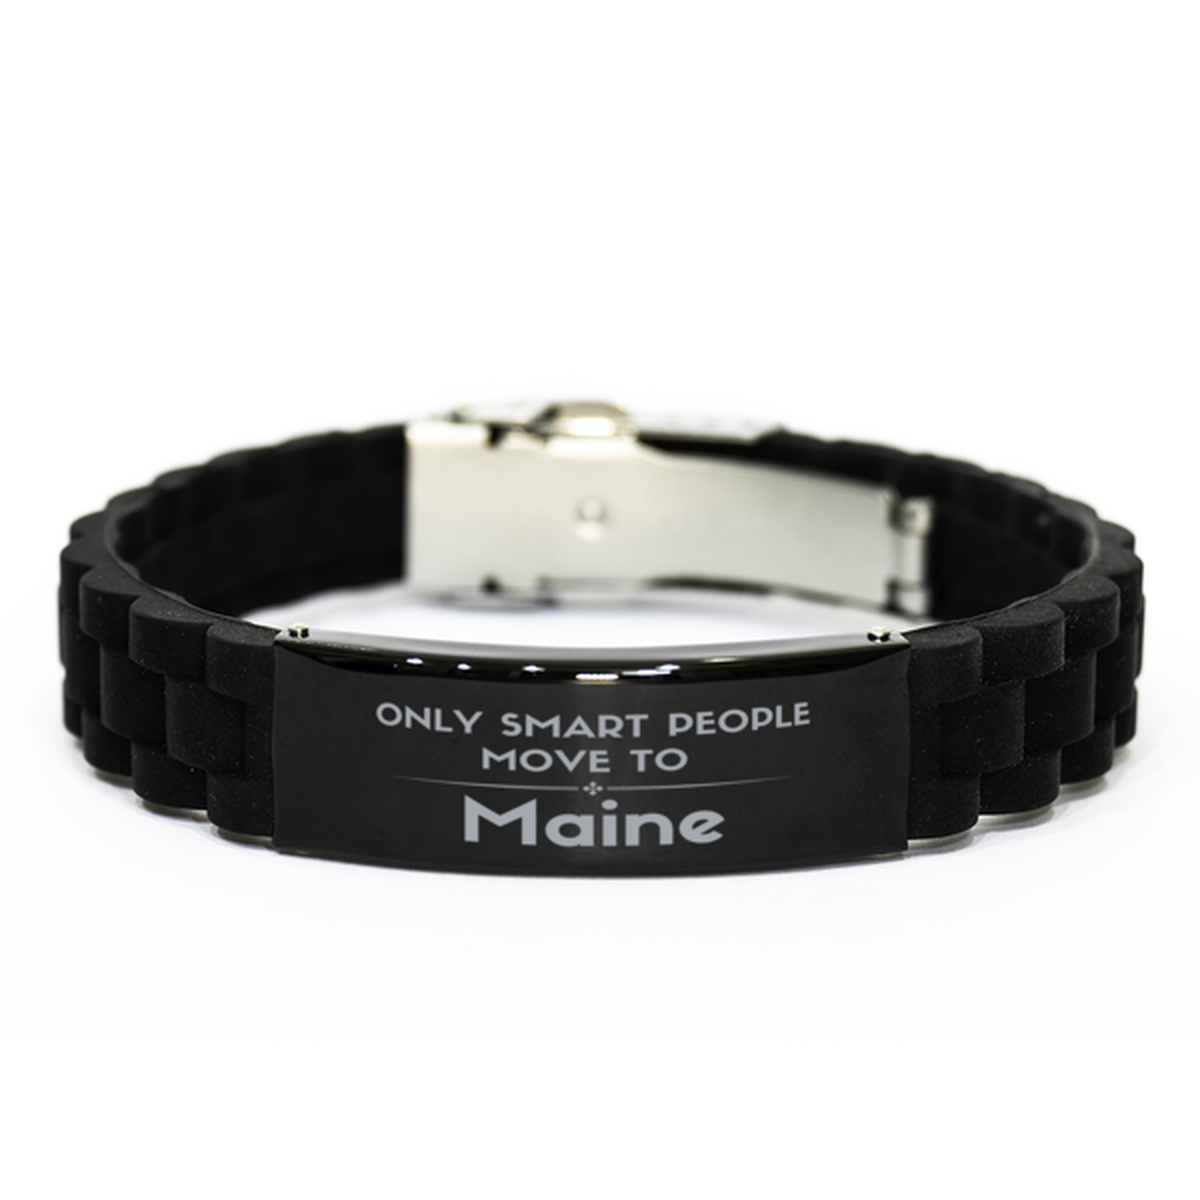 Only smart people move to Maine Black Glidelock Clasp Bracelet, Gag Gifts For Maine, Move to Maine Gifts for Friends Coworker Funny Saying Quote